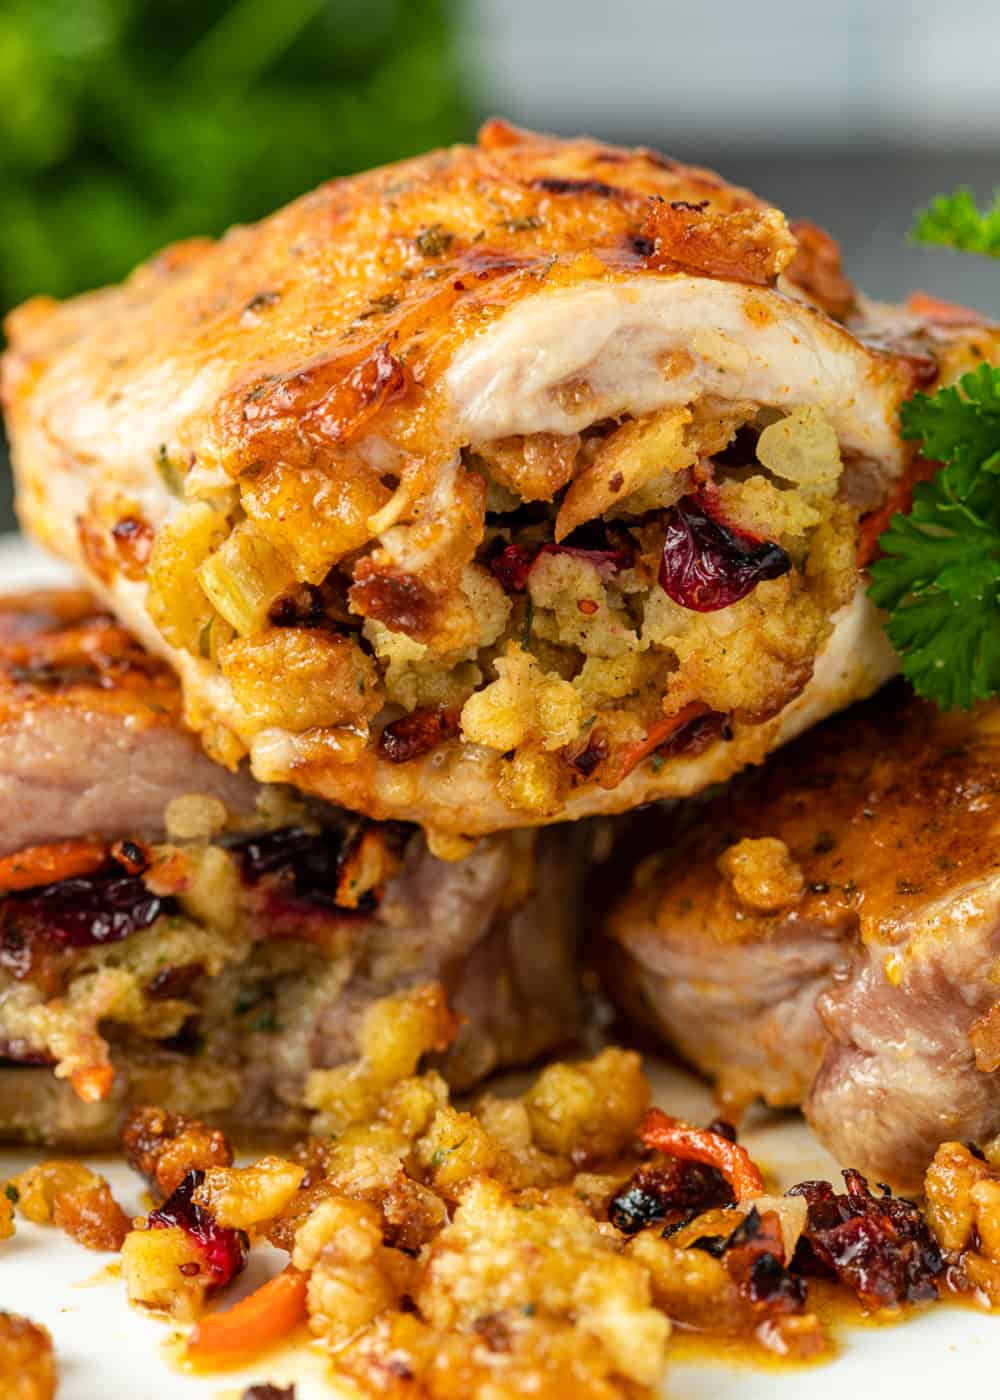 cranberry stuffed baked pork chops stacked on plate